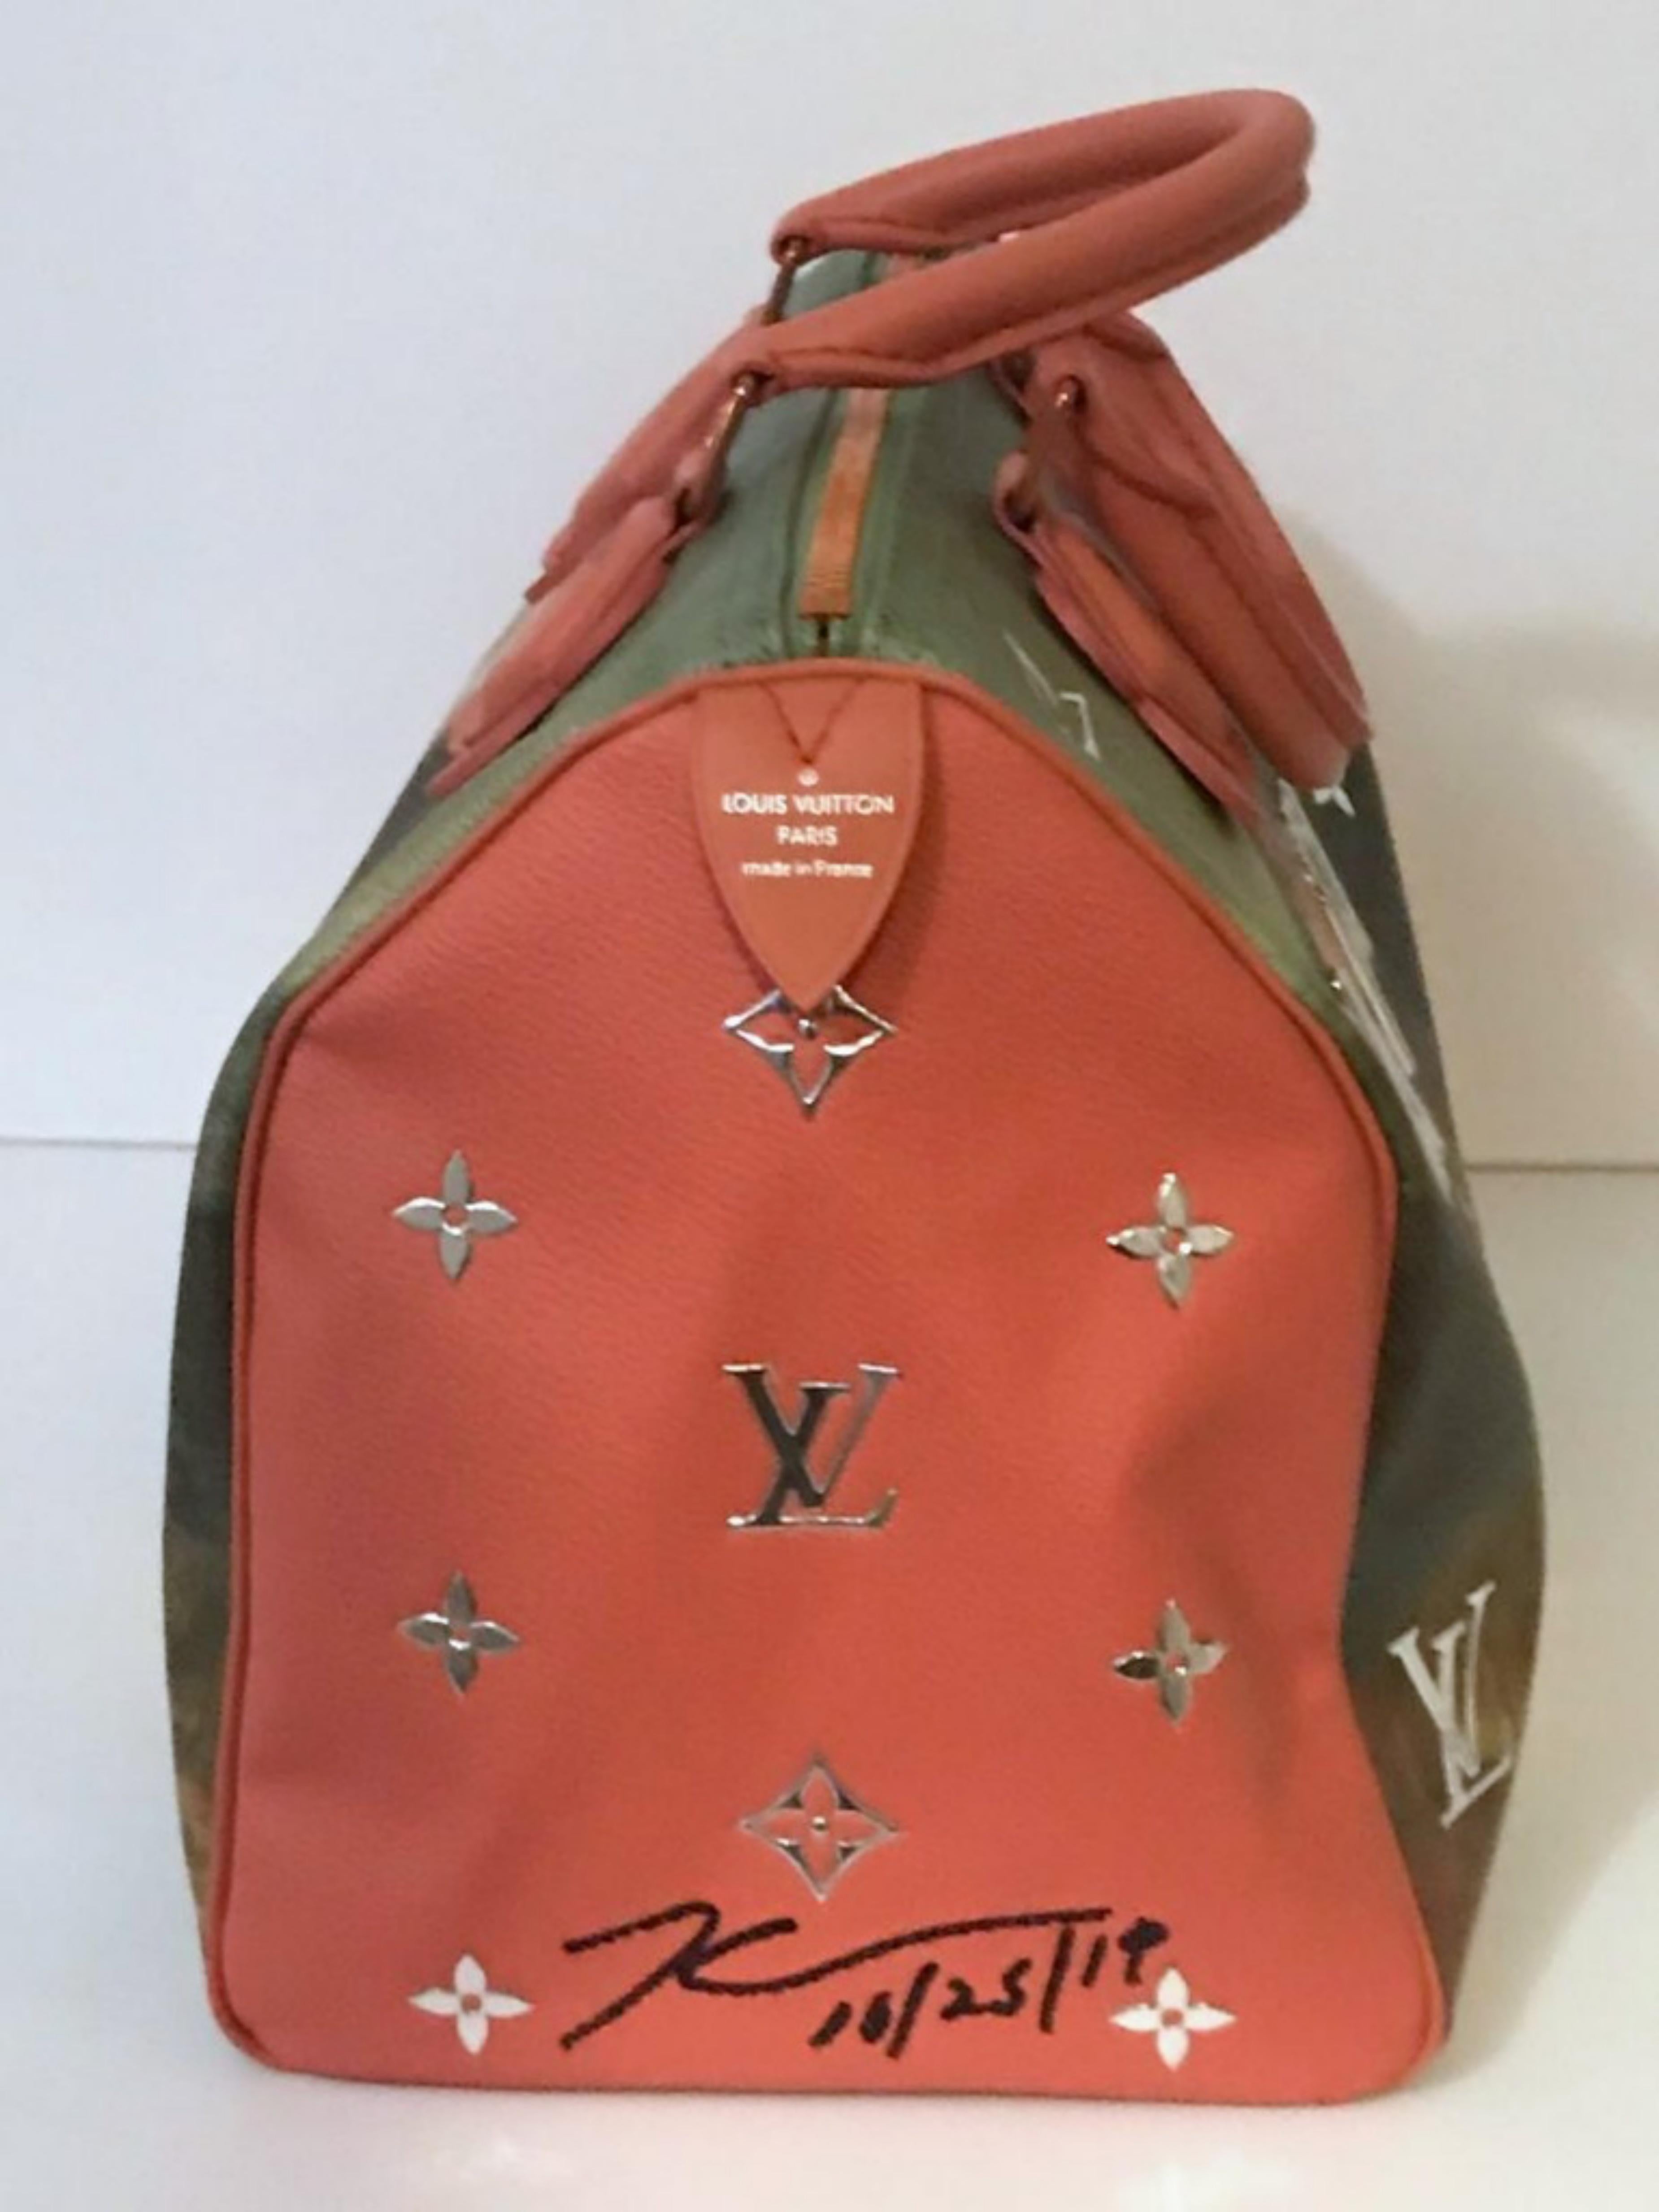 Louis Vuitton Da Vinci bag (uniquely hand signed and dated by Jeff Koons)  For Sale 2